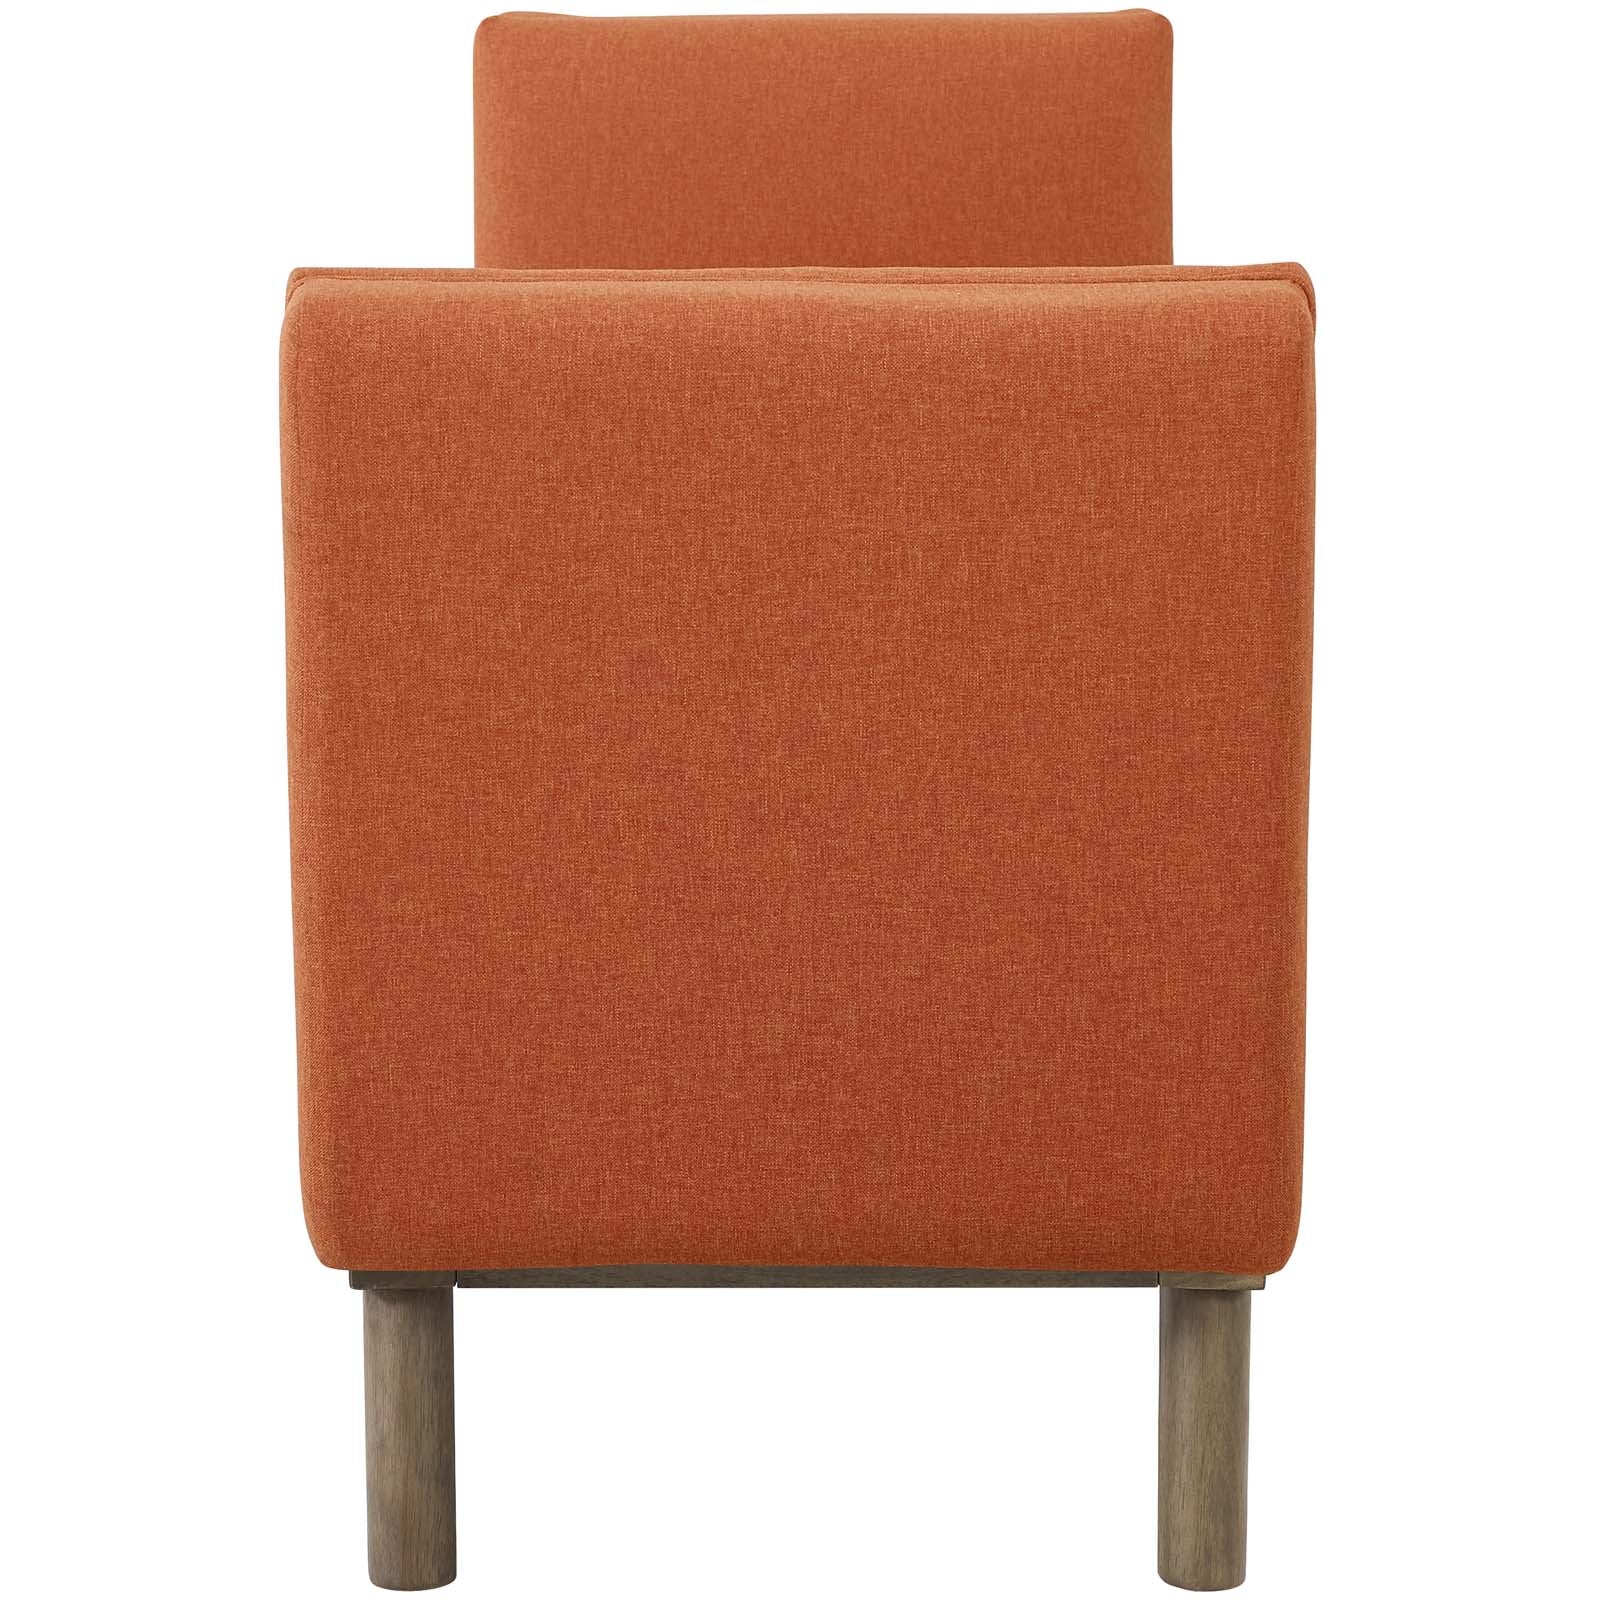 Modway Benches - Haven Tufted Button Upholstered Fabric Accent Bench Orange